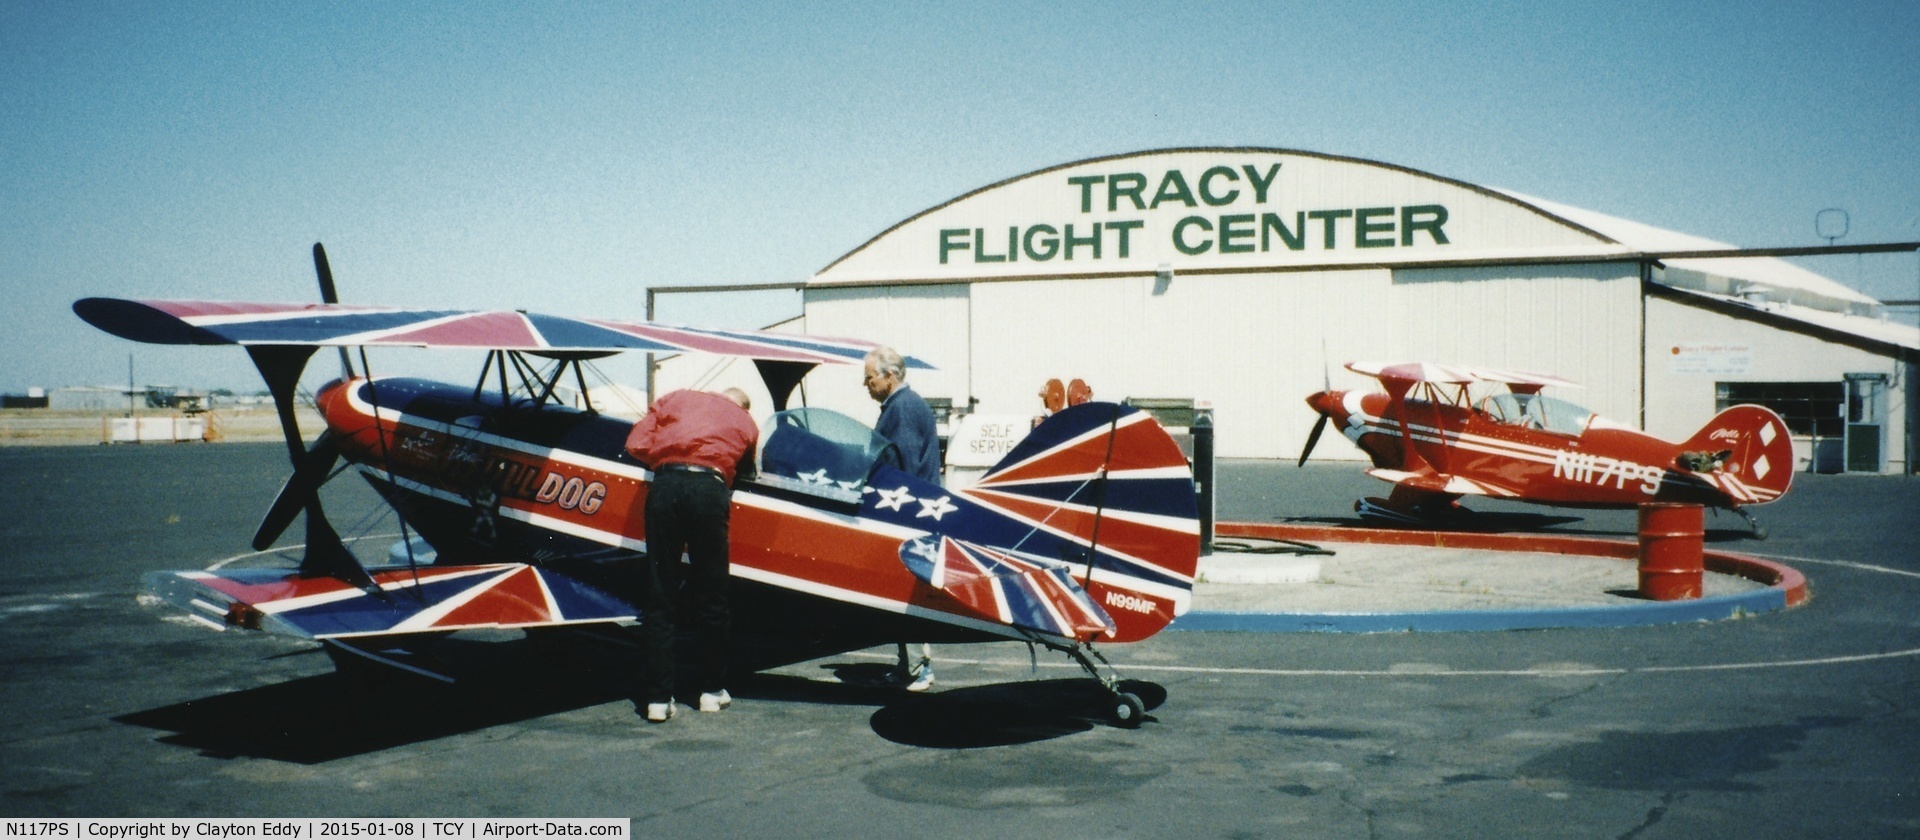 N117PS, 1996 Aviat Pitts S-2B Special C/N 5346, Tracy airport 1990's